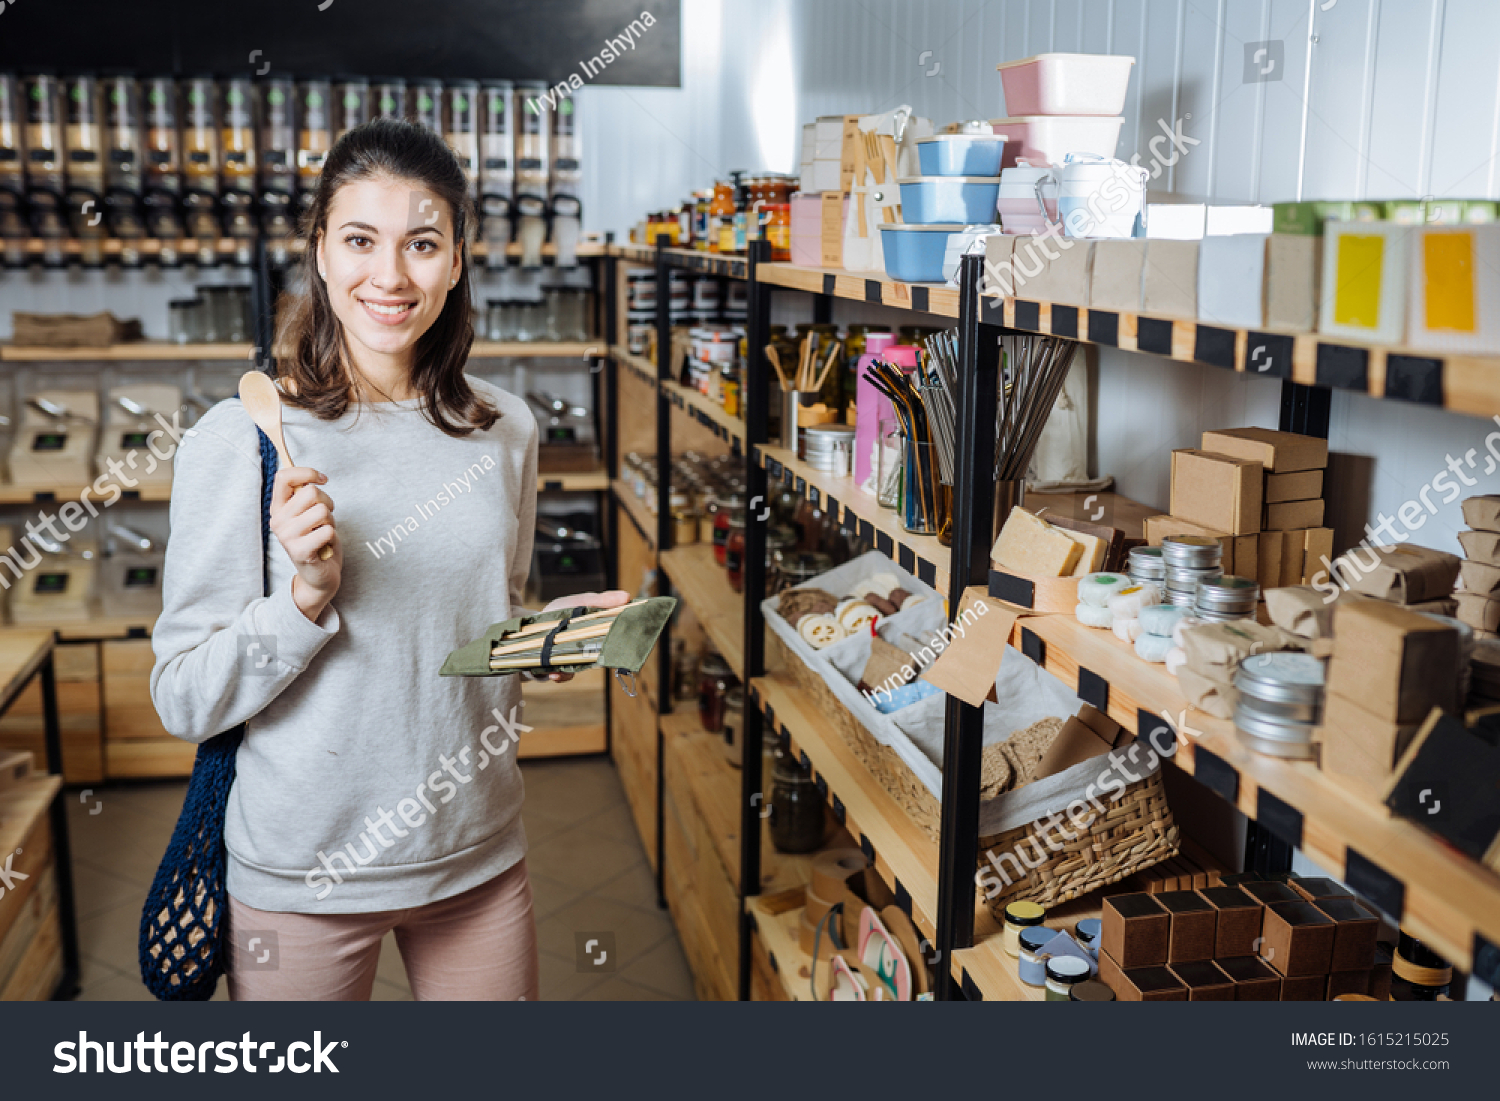 Eco friendly vegan woman customer chooses and buys products in zero waste shop. Eco shopping at local business concept. Plastic free items. reuse, reduce #1615215025